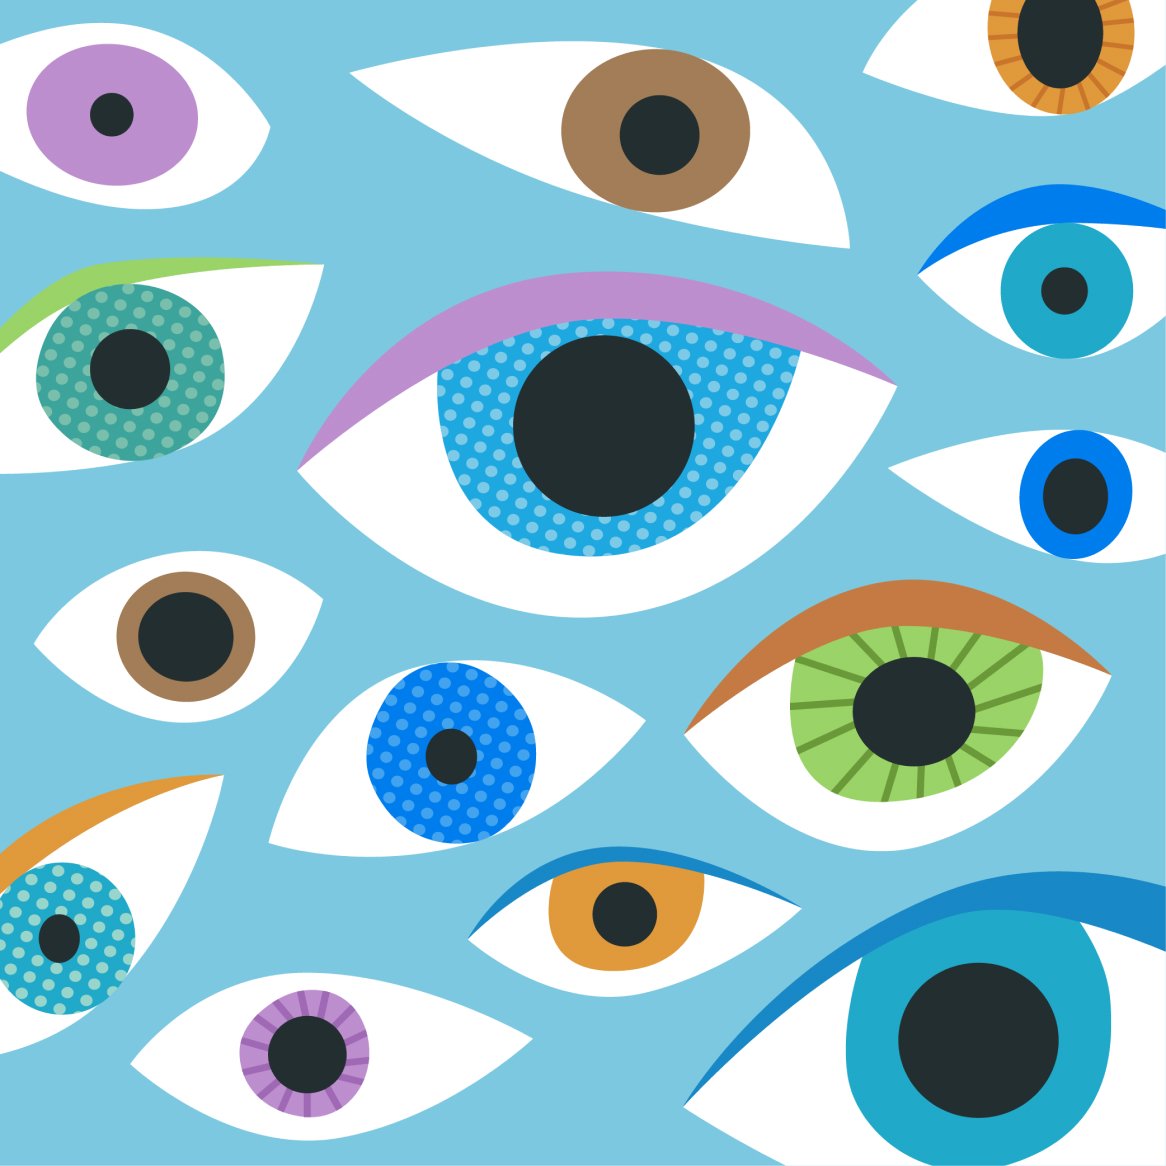 Artwork showing a compilation of eyes including some with dilated pupils